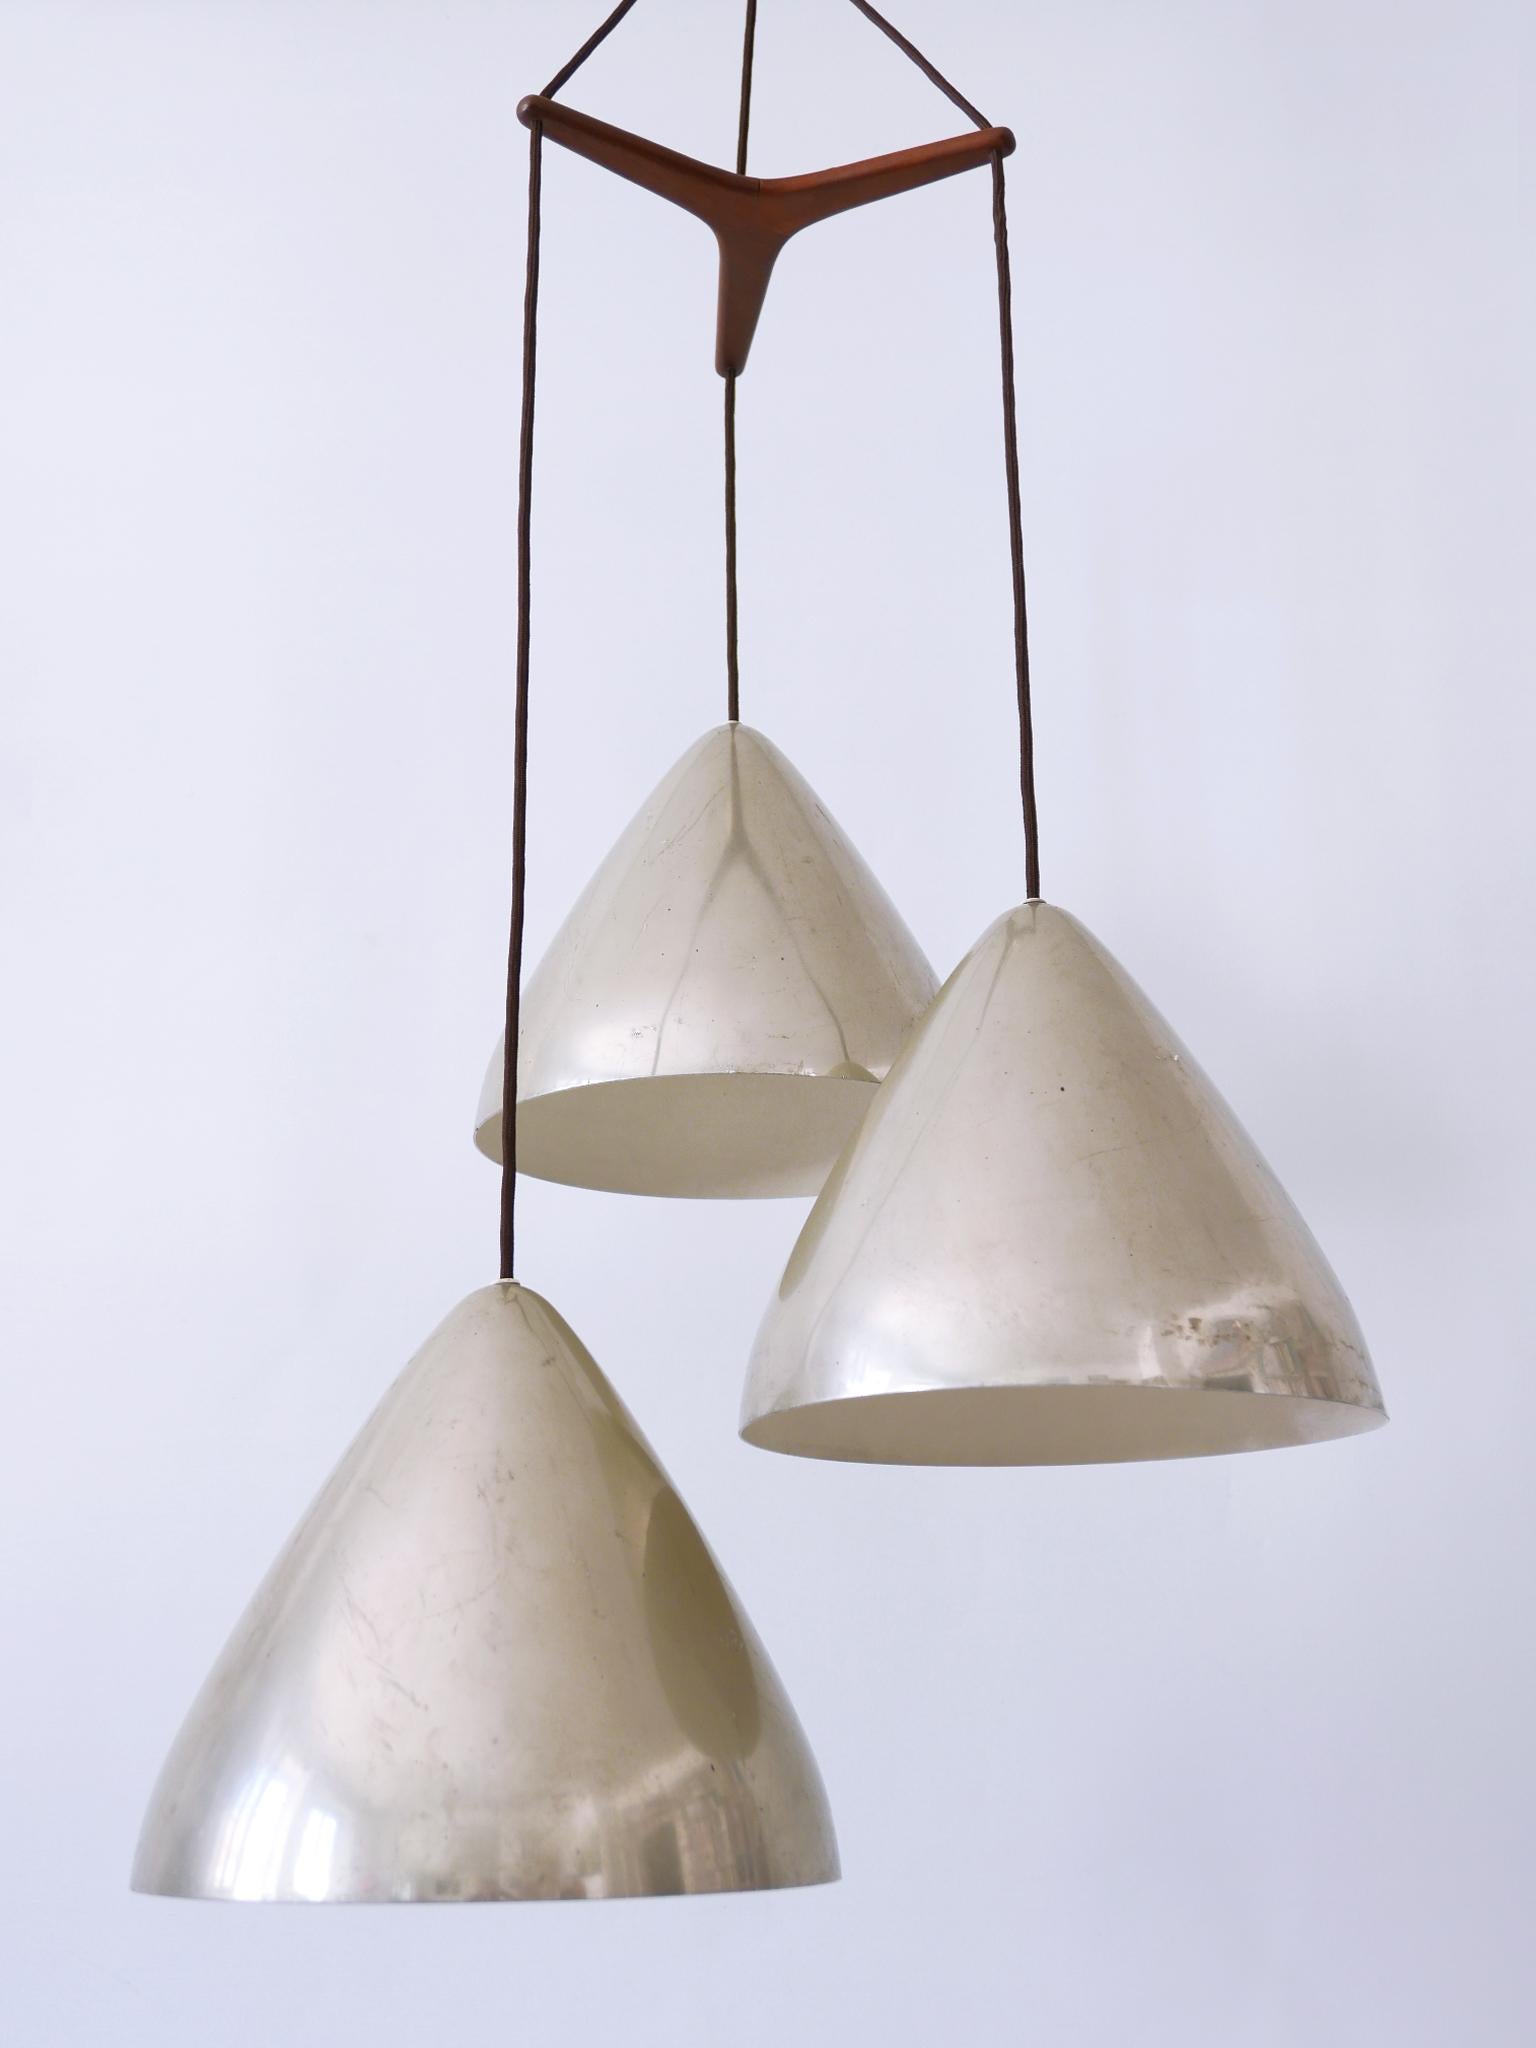 Elegant Cascading Pendant Lamp by Lisa Johansson-Pape for Orno Finland 1960s For Sale 7